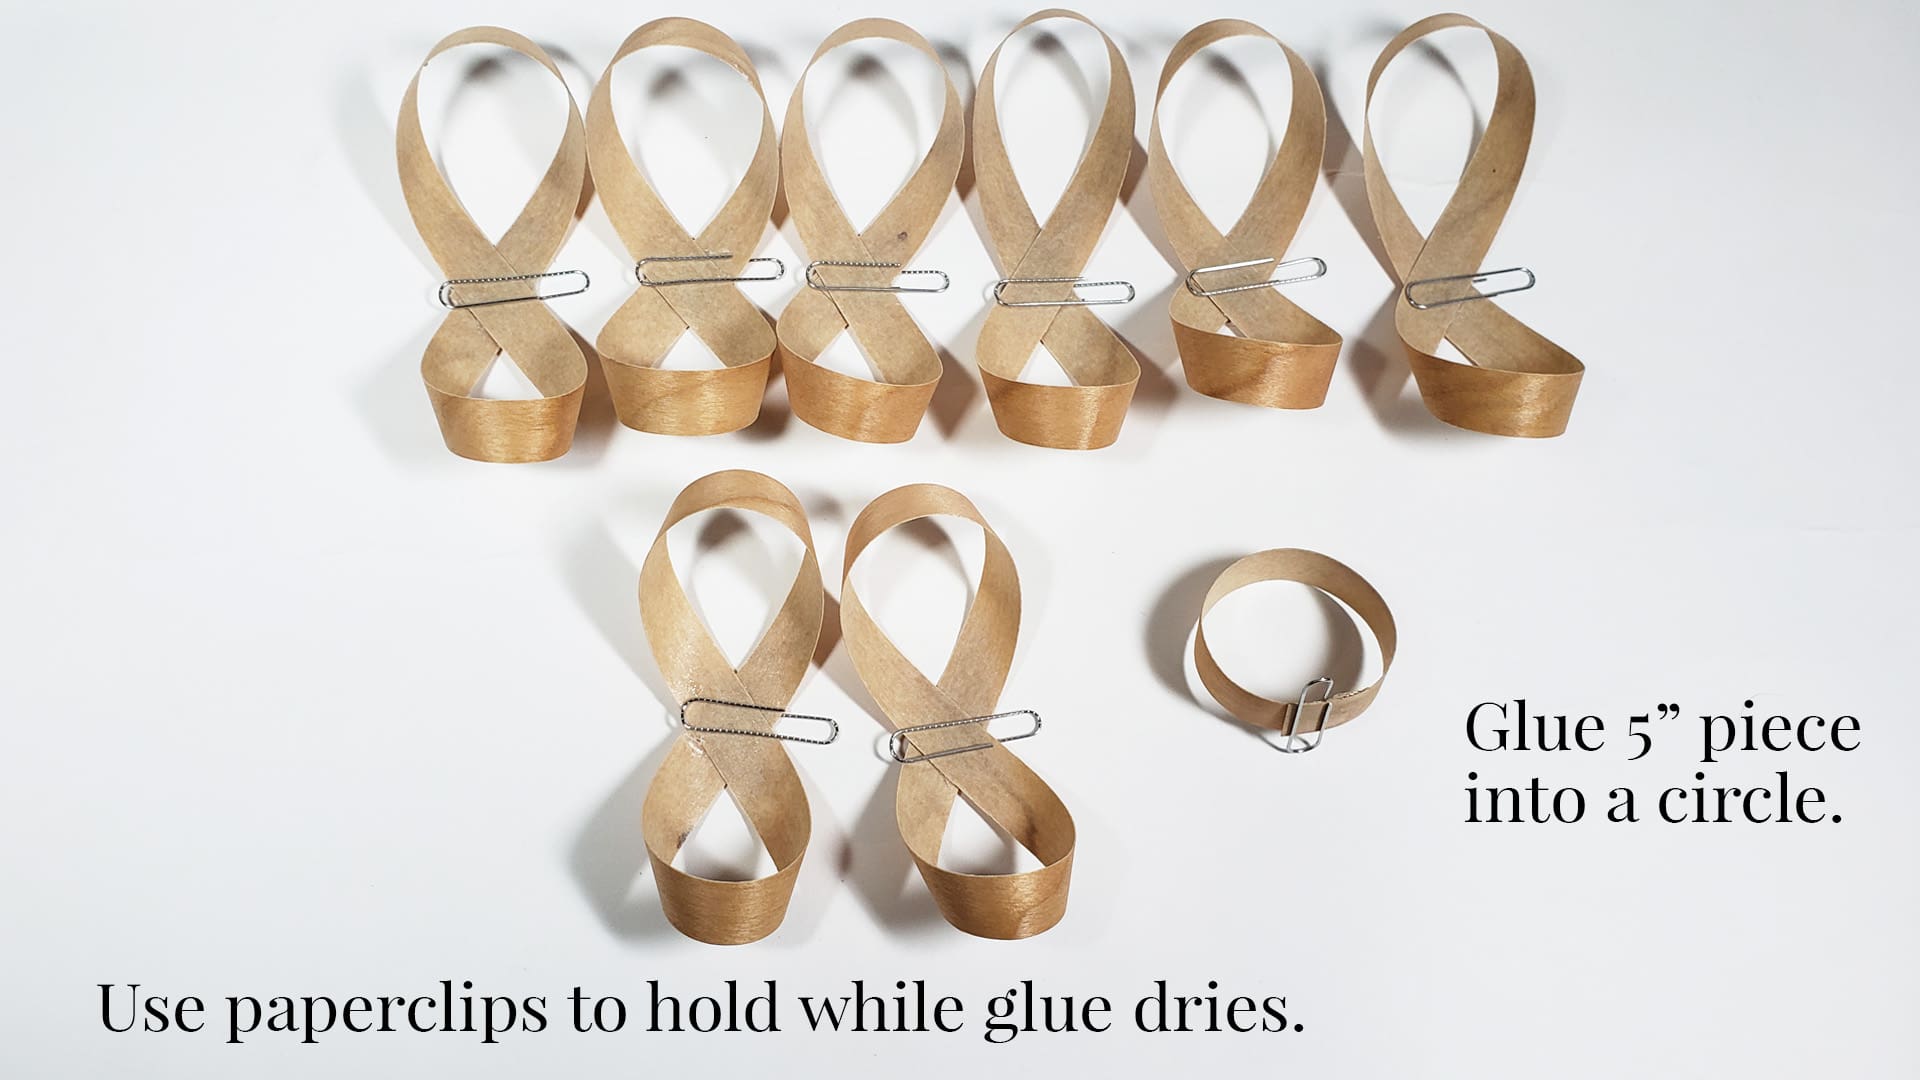 Use paperclips to hold while wood and glue are drying